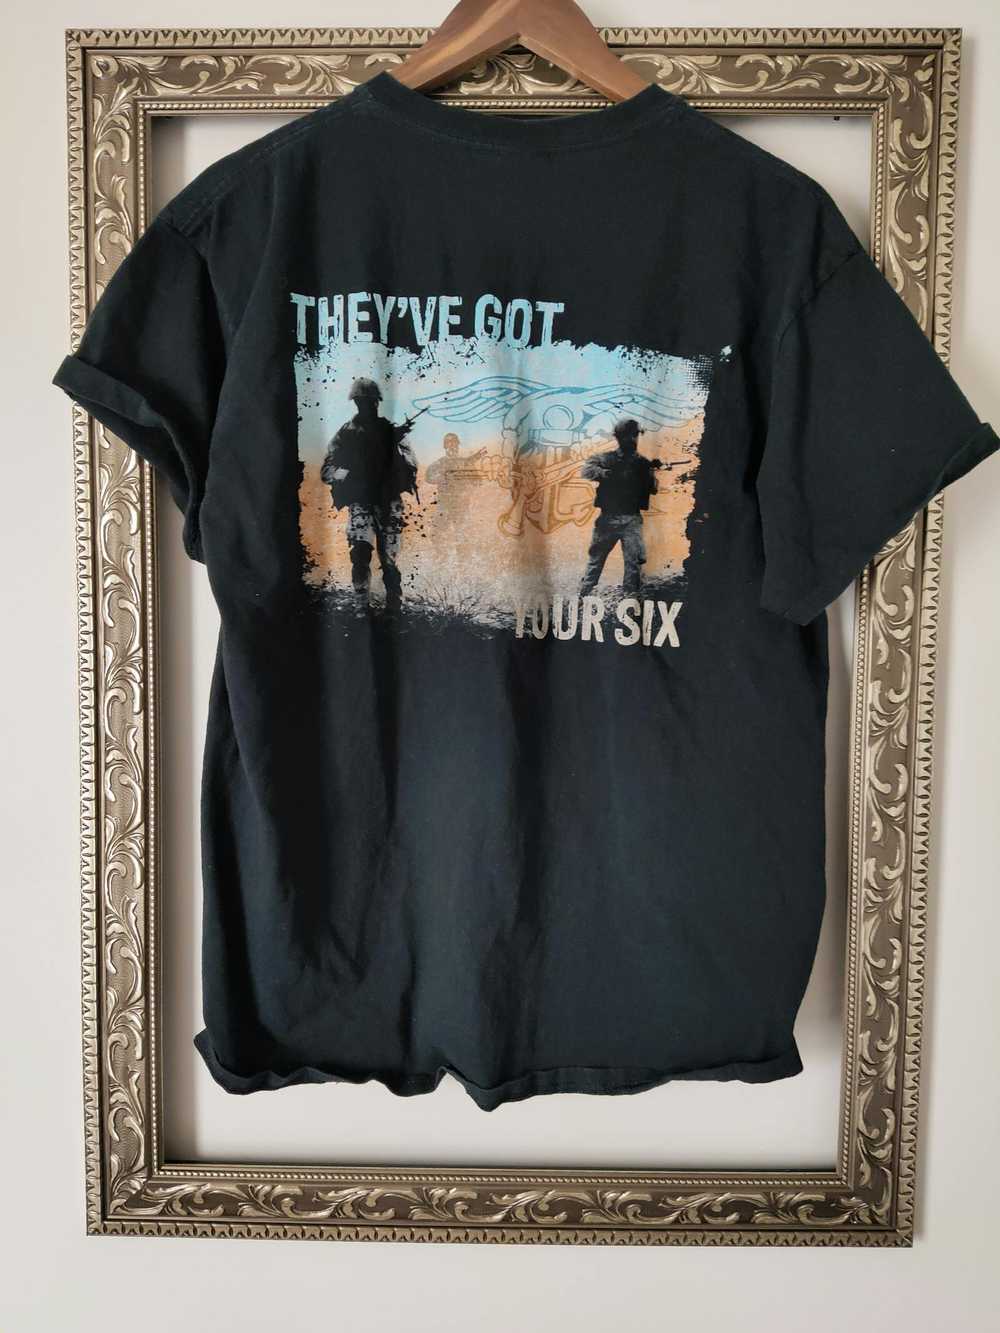 Other Navy Seals "We got your six" Tee - image 2